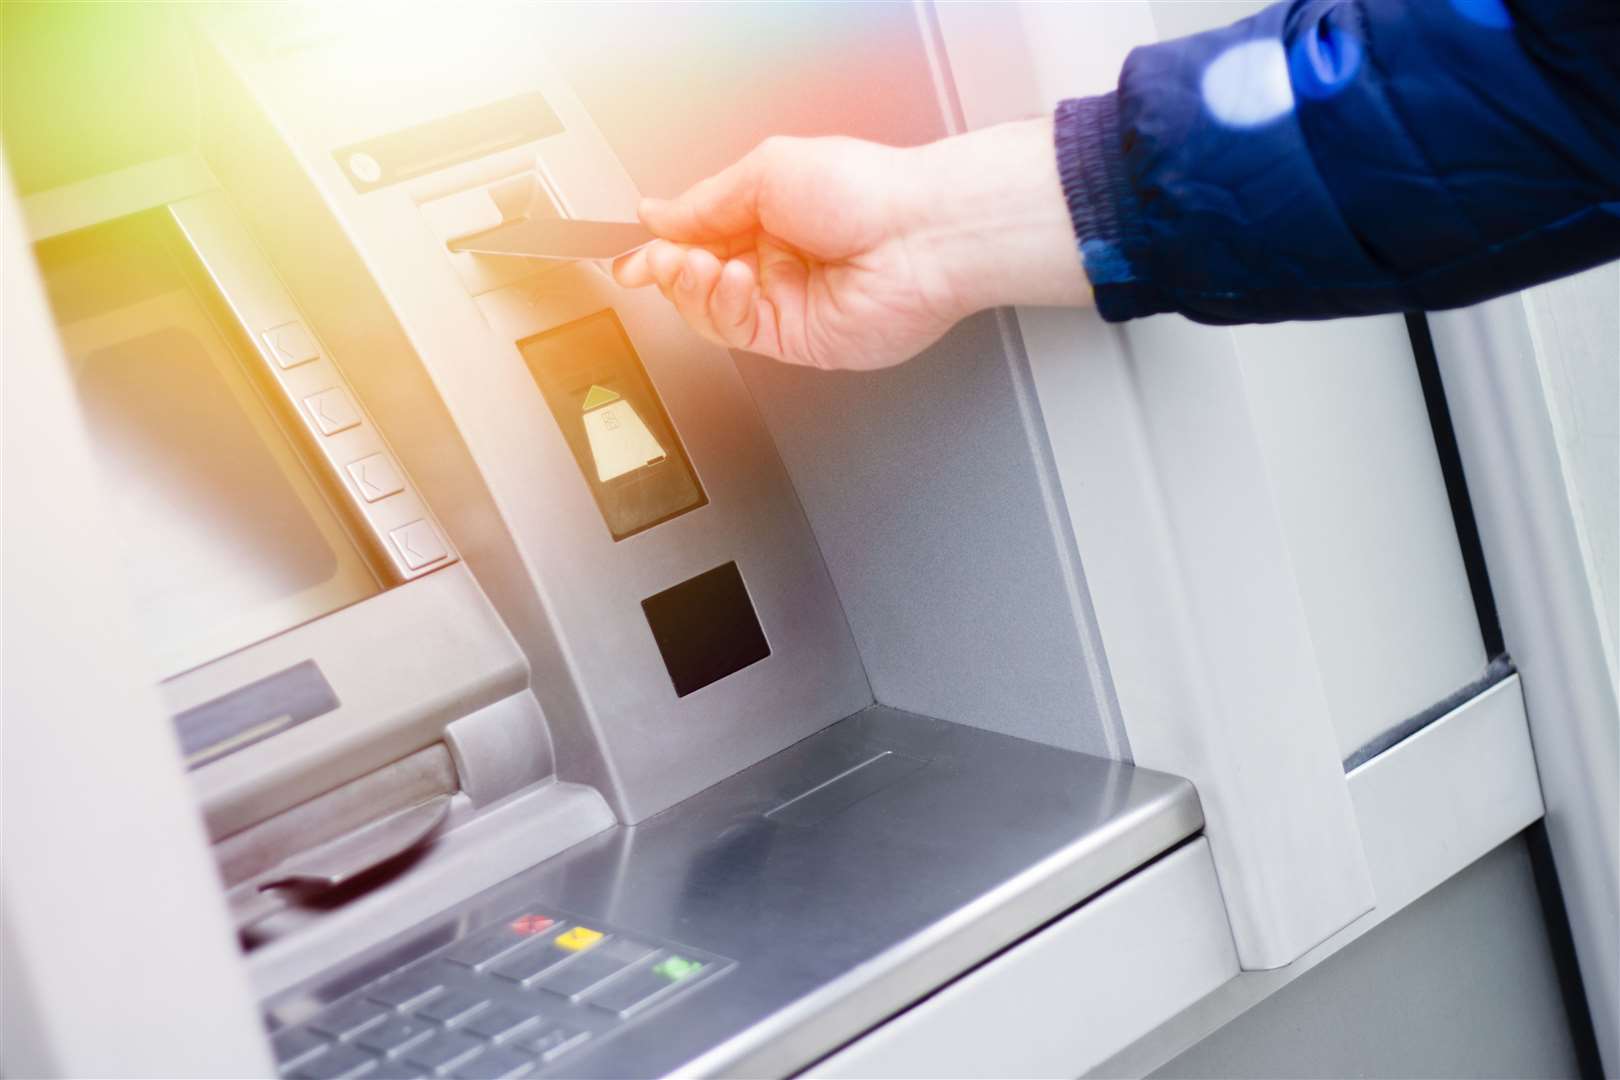 Jamie Stone and other MPs are concerned that one in four ATMs now charge to withdraw cash.